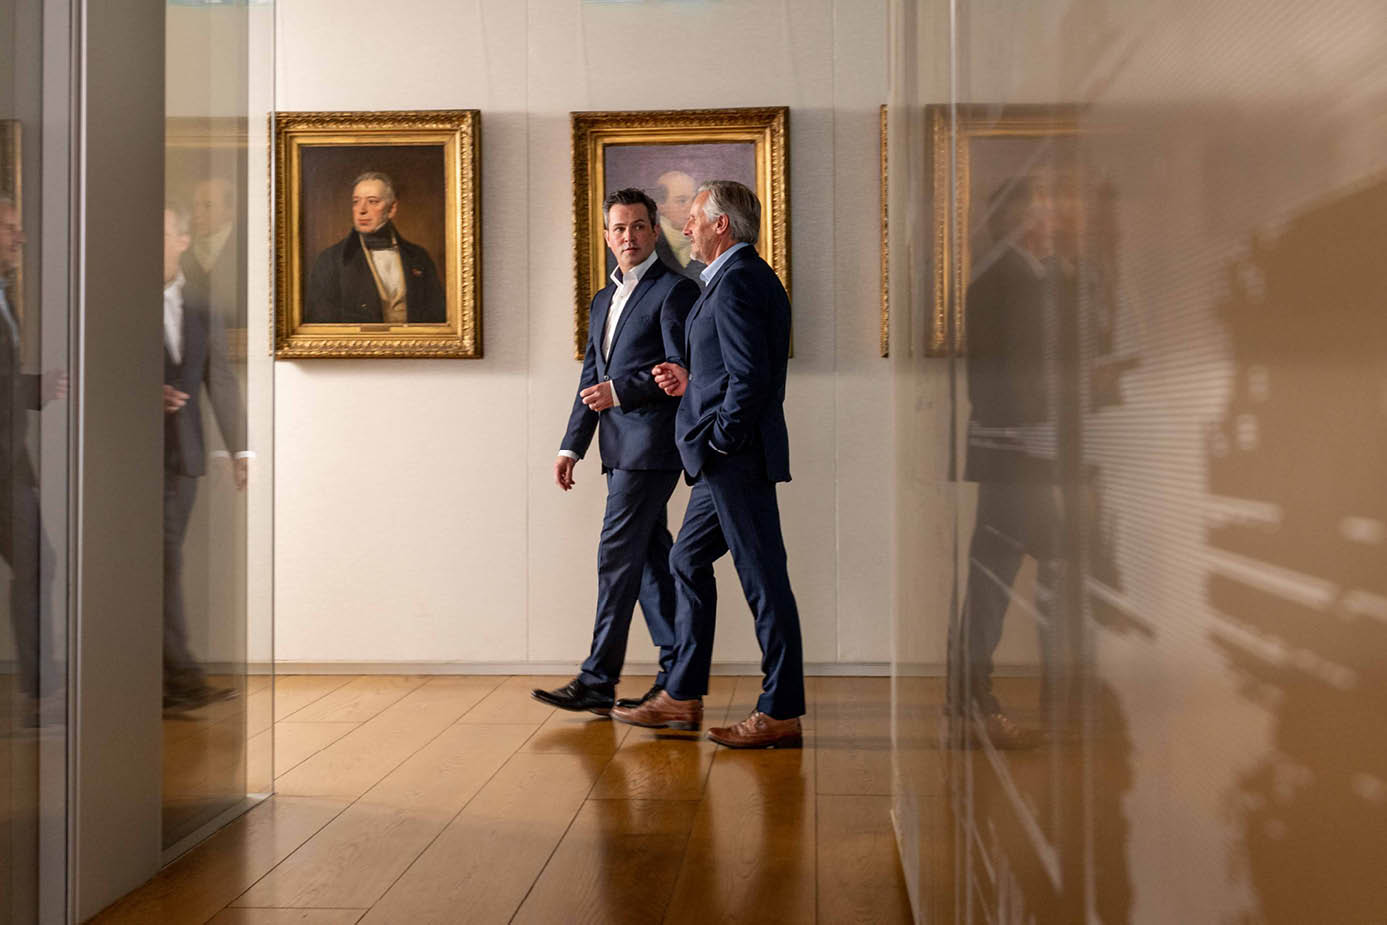 Two men walking down a hallway behind family paintings